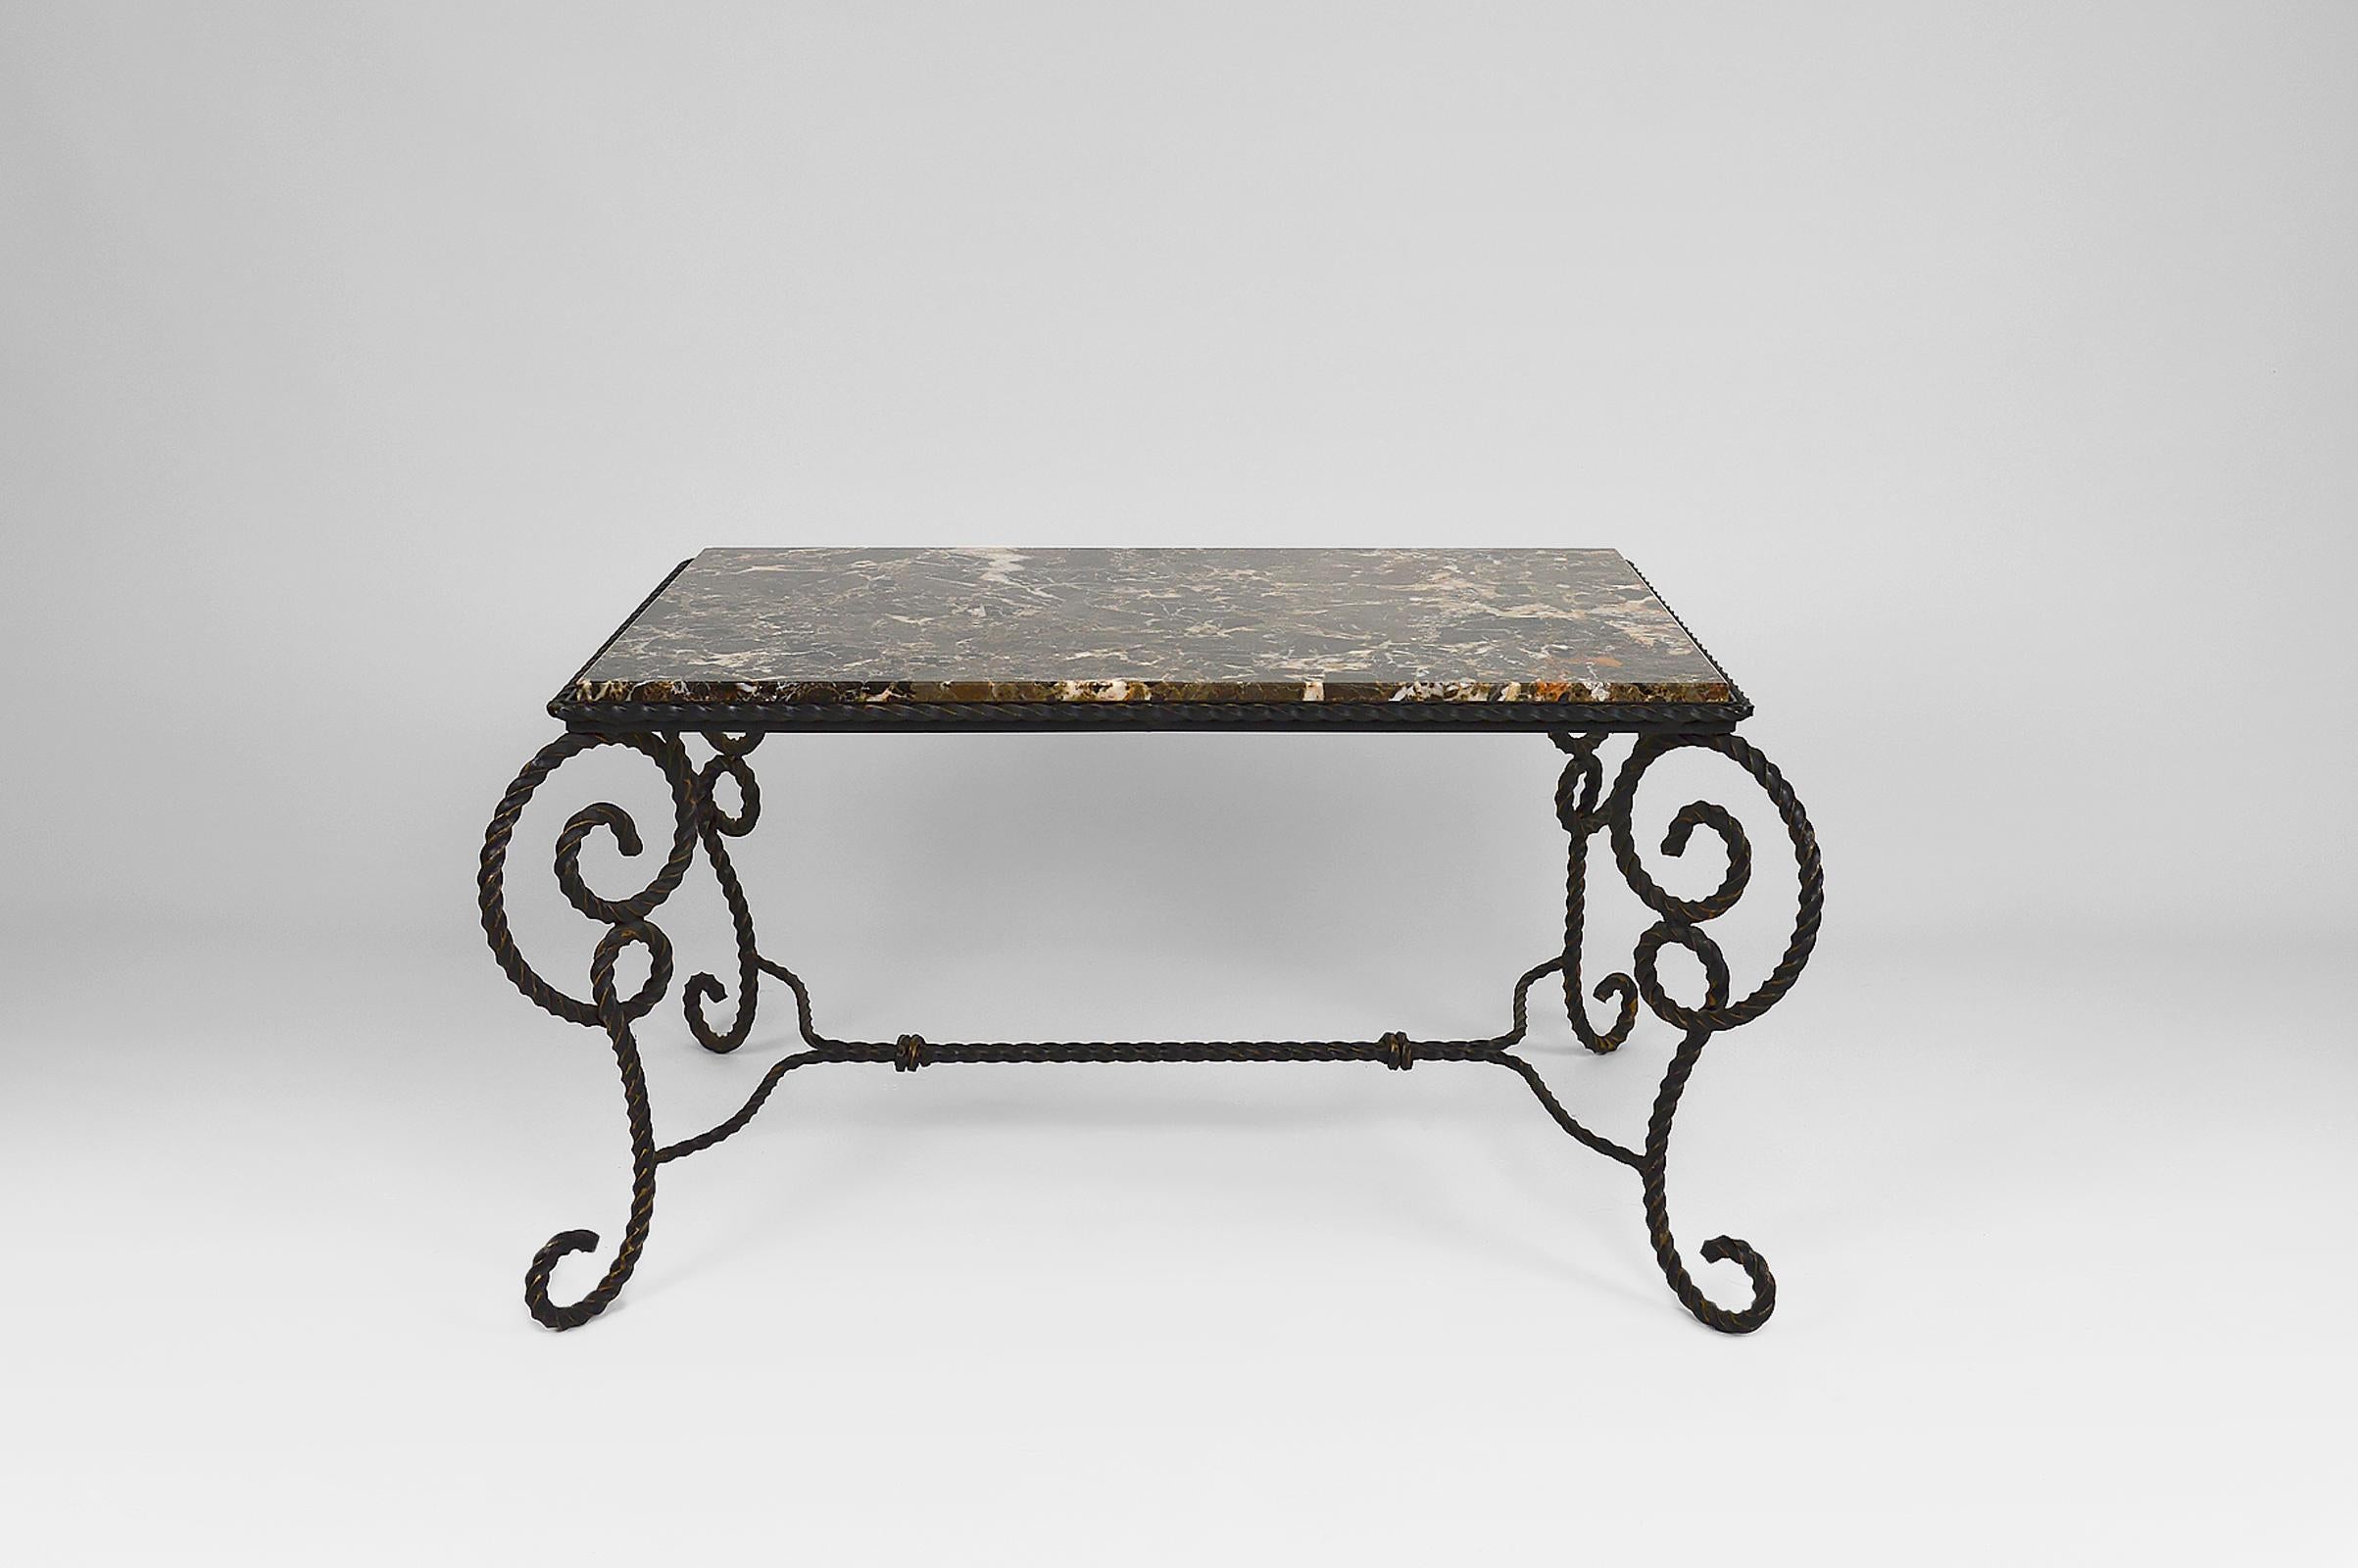 Elegant rectangular coffee / side table made of a very beautiful brown / taupe colored marble and a twisted wrought iron base imitating ropes. 
Beautiful black and golden brown patina.

Art Deco, France, circa 1940-1950.

Nice build